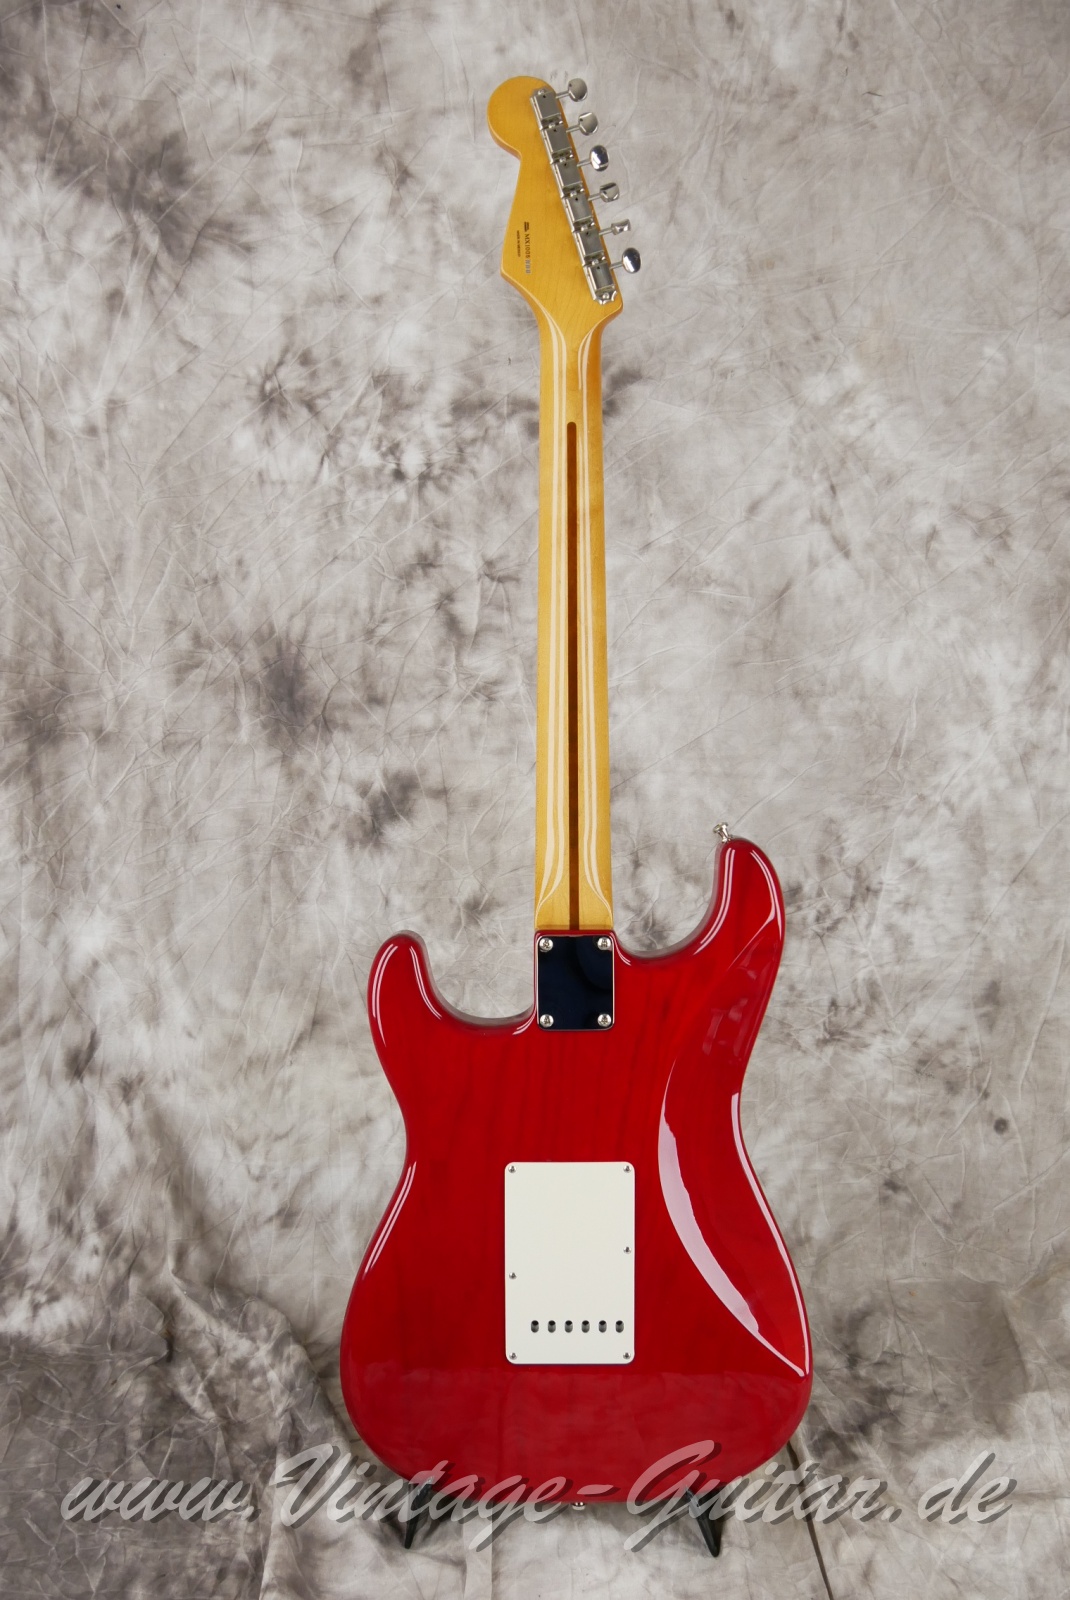 Fender_Stratocaster_classic_50s_Mexico_transparent_red_2010-002.JPG